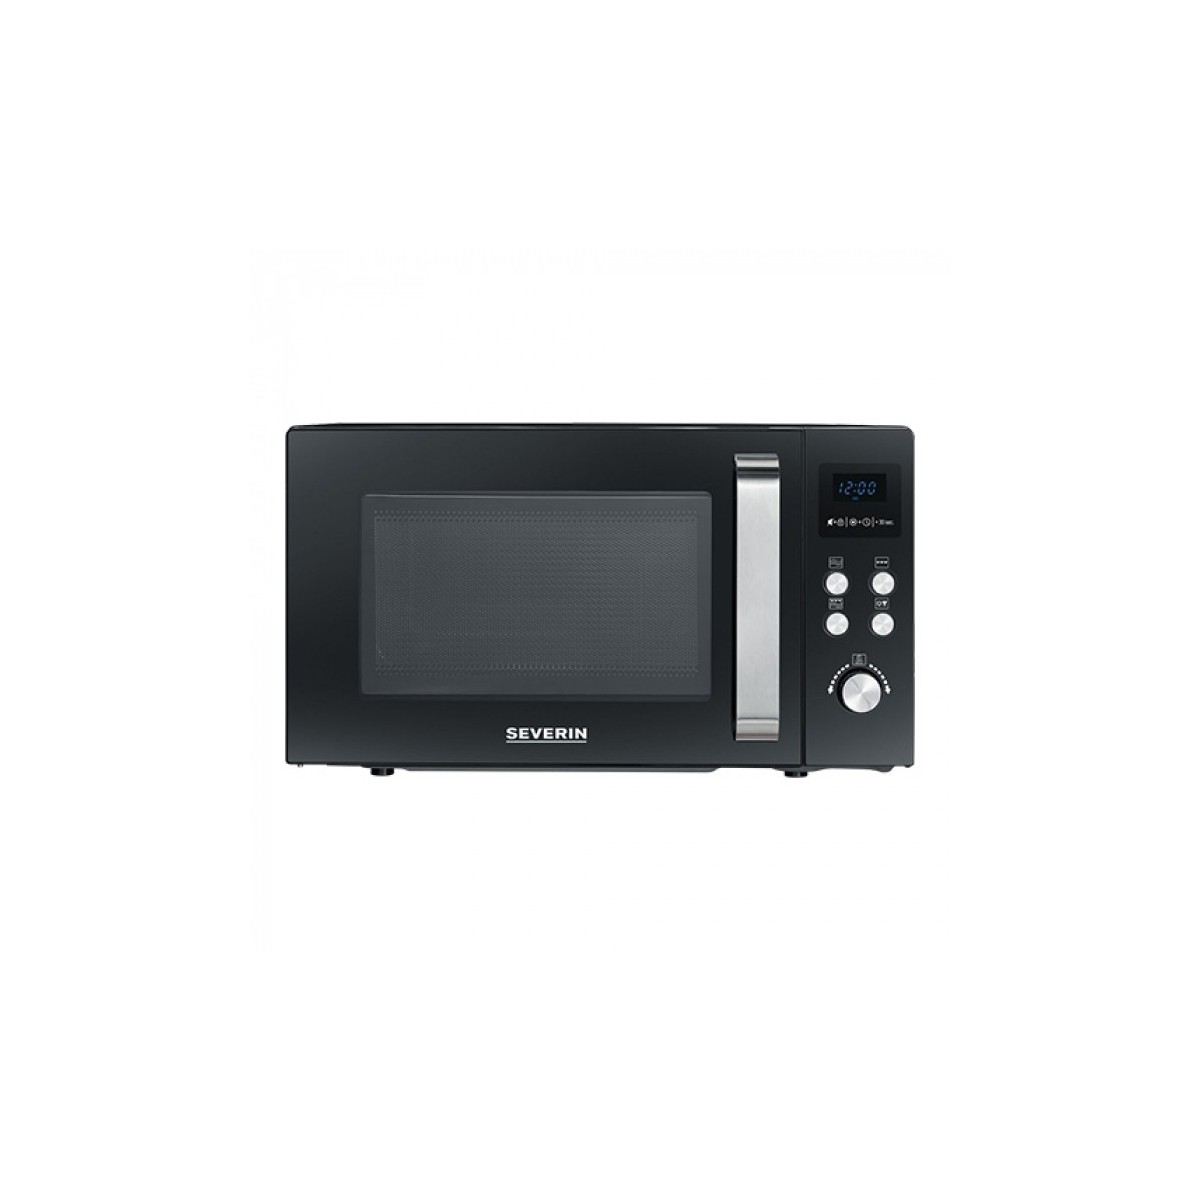 MICRO WAVE OVEN WITH GRILL SEVERIN 20L 800W MONO TURNTABLE DIAM27 H26,2X45,2CM